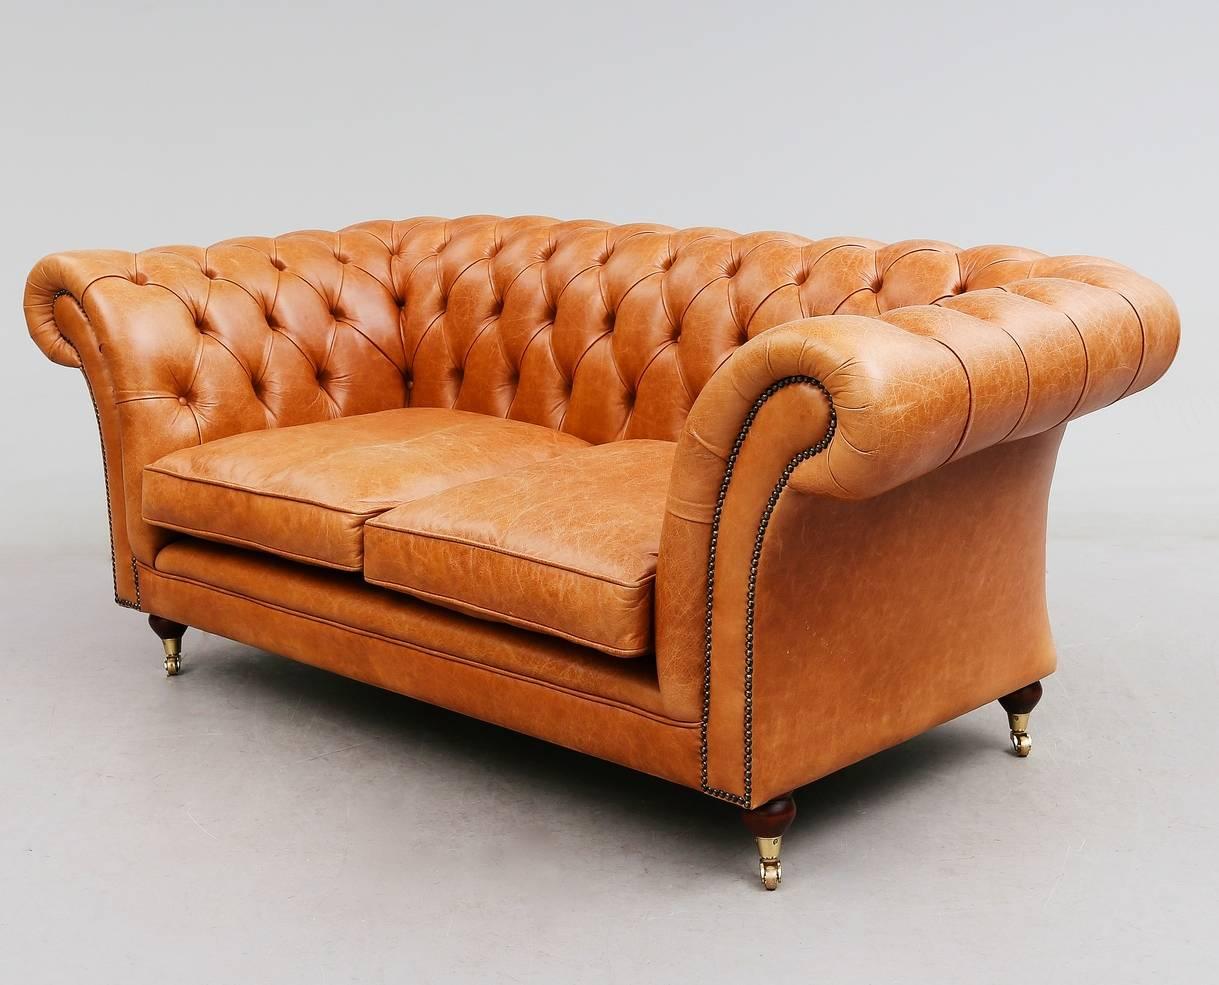 Classic Chesterfield style sofa tufted with light brown leather. Rolled arms and back, two loose seat cushions. Stud decorations.